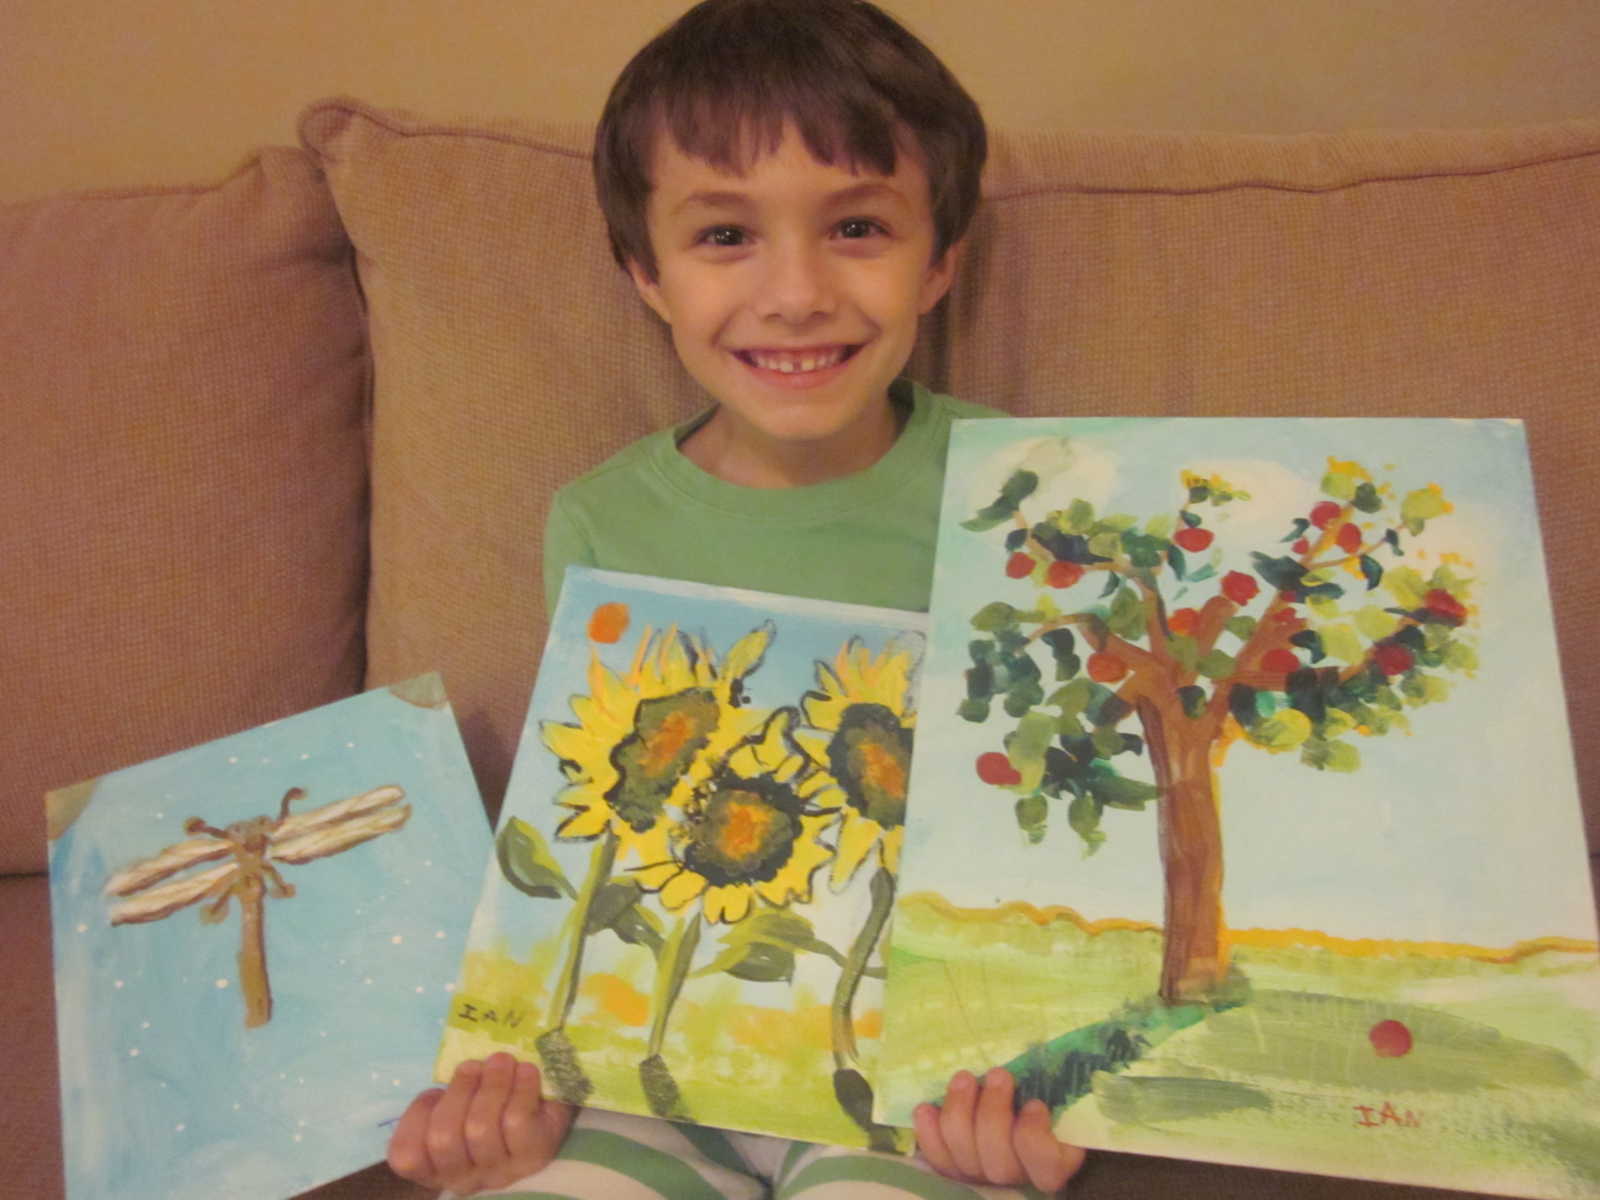 young boy sits on couch smiling while holding up three drawings of firefly, sunflower, and tree